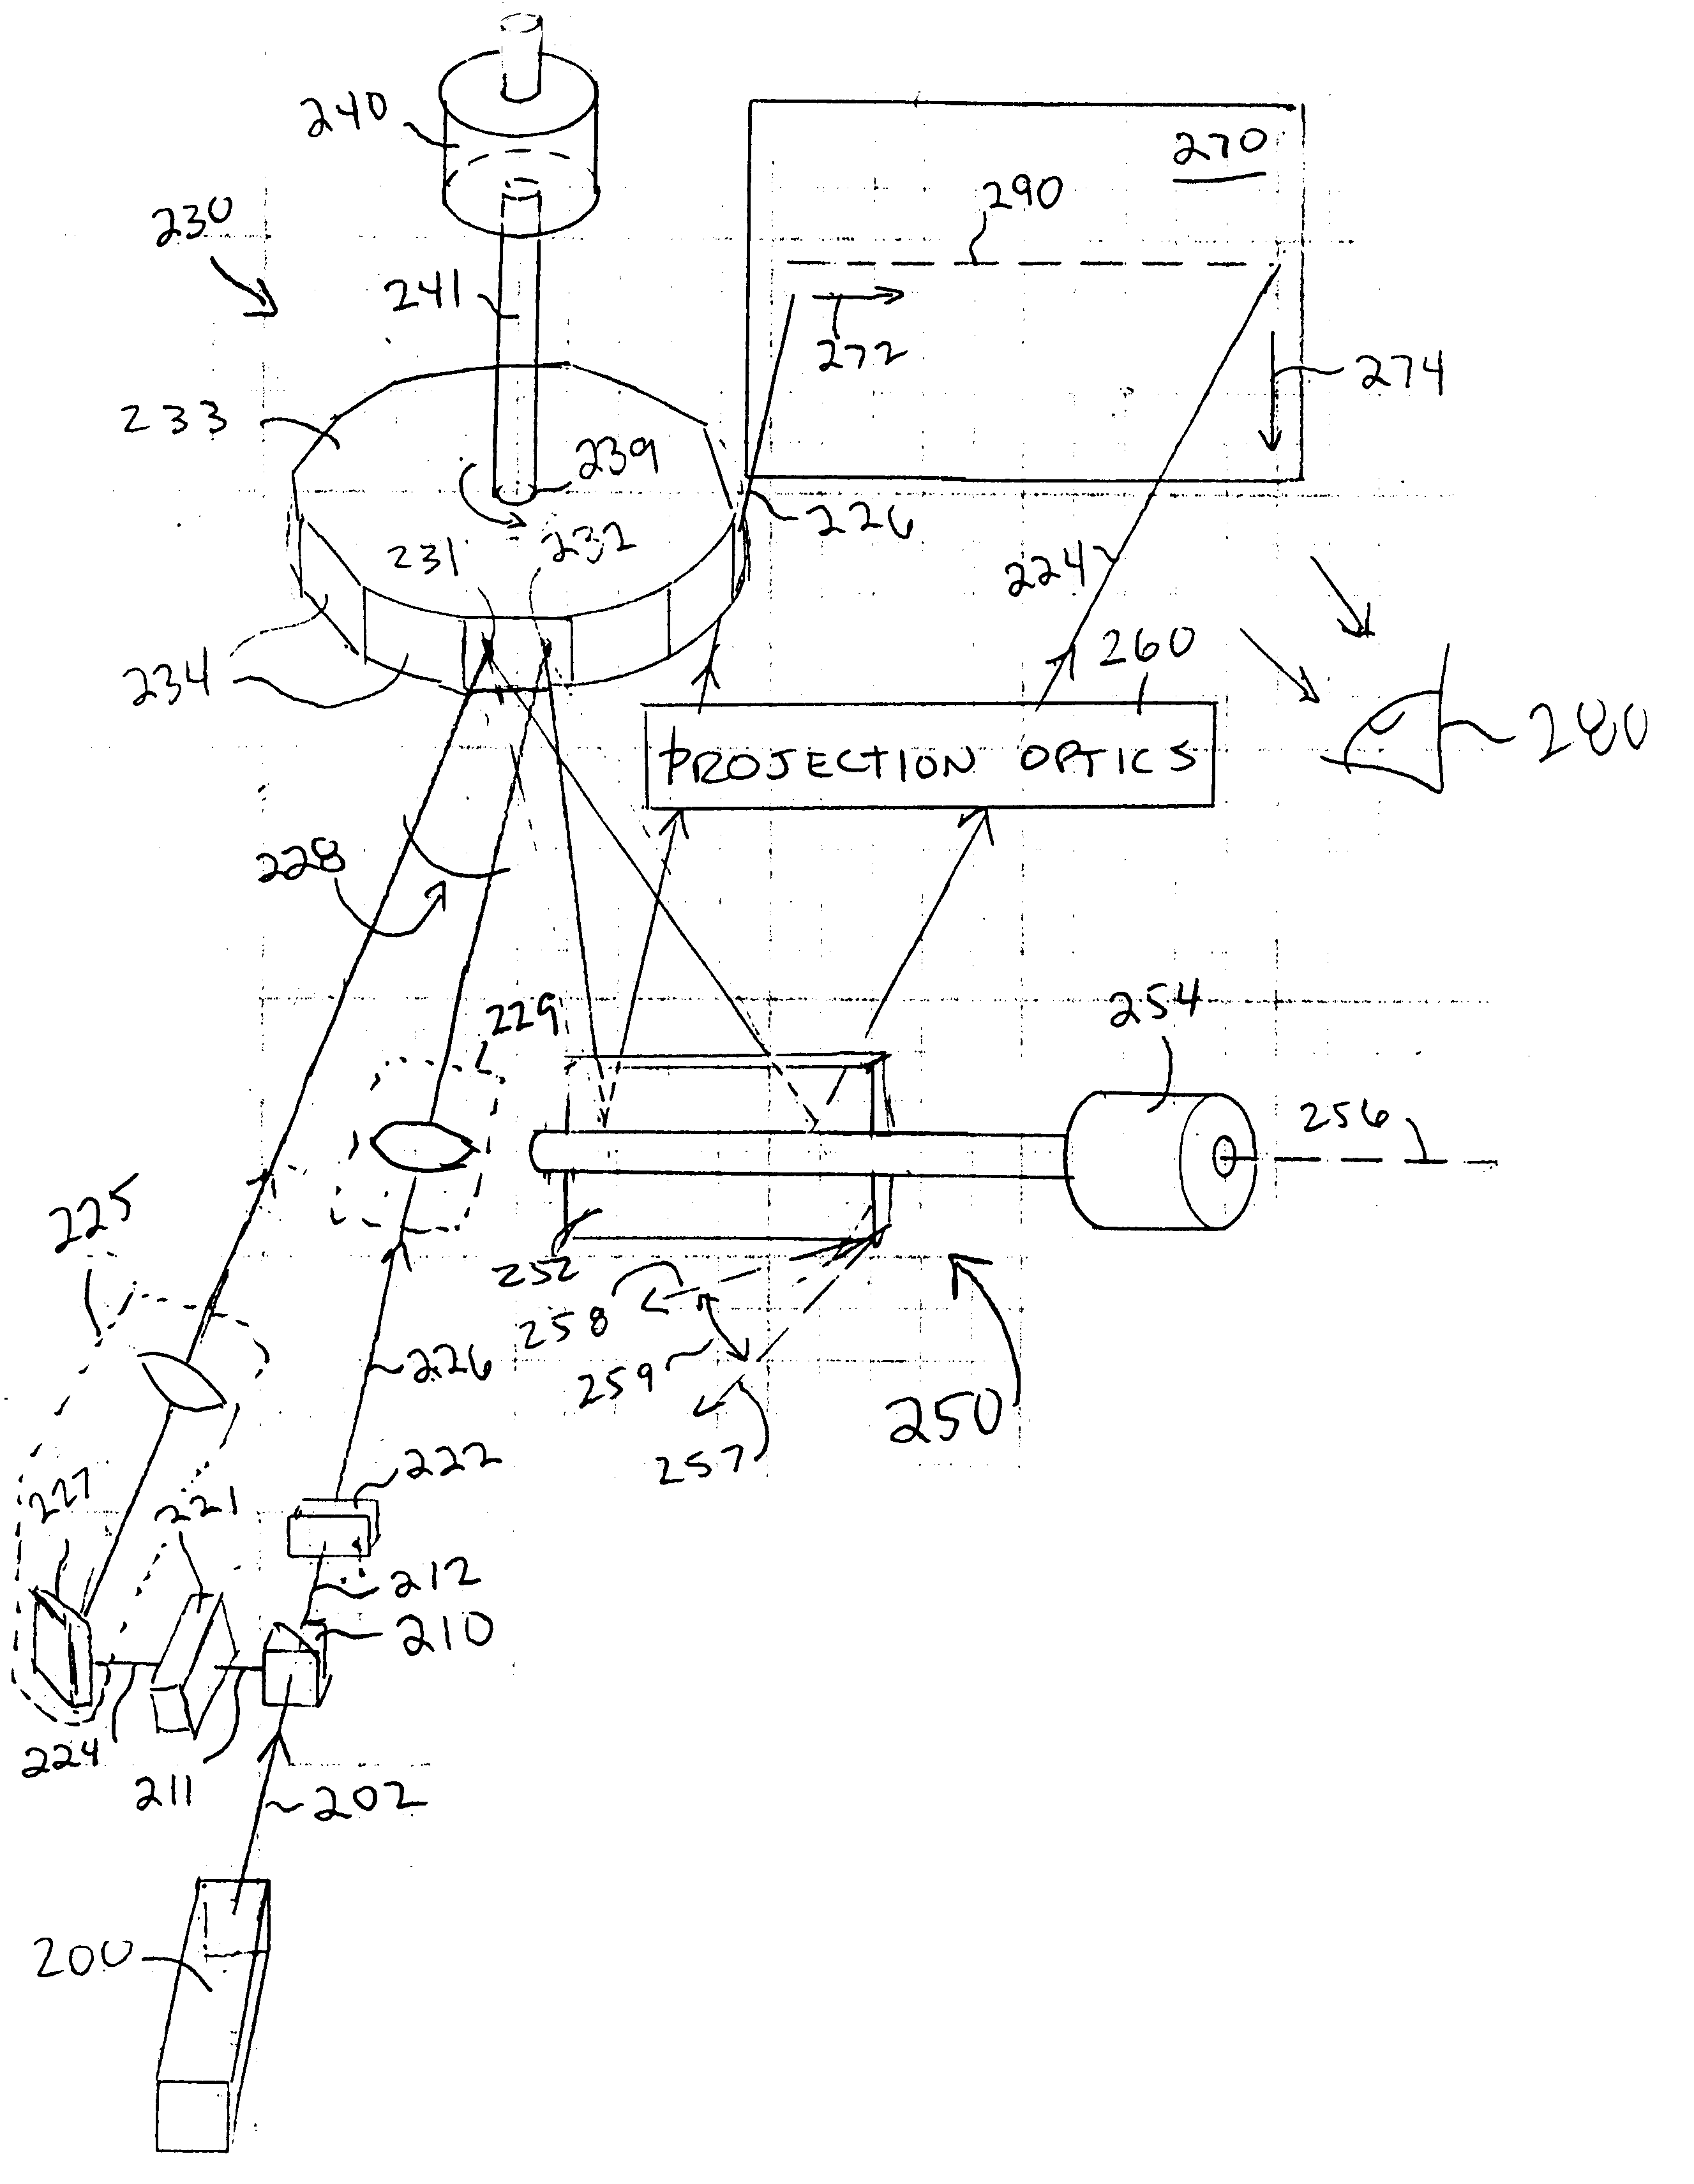 Laser imaging system with progressive multi-beam scan architecture